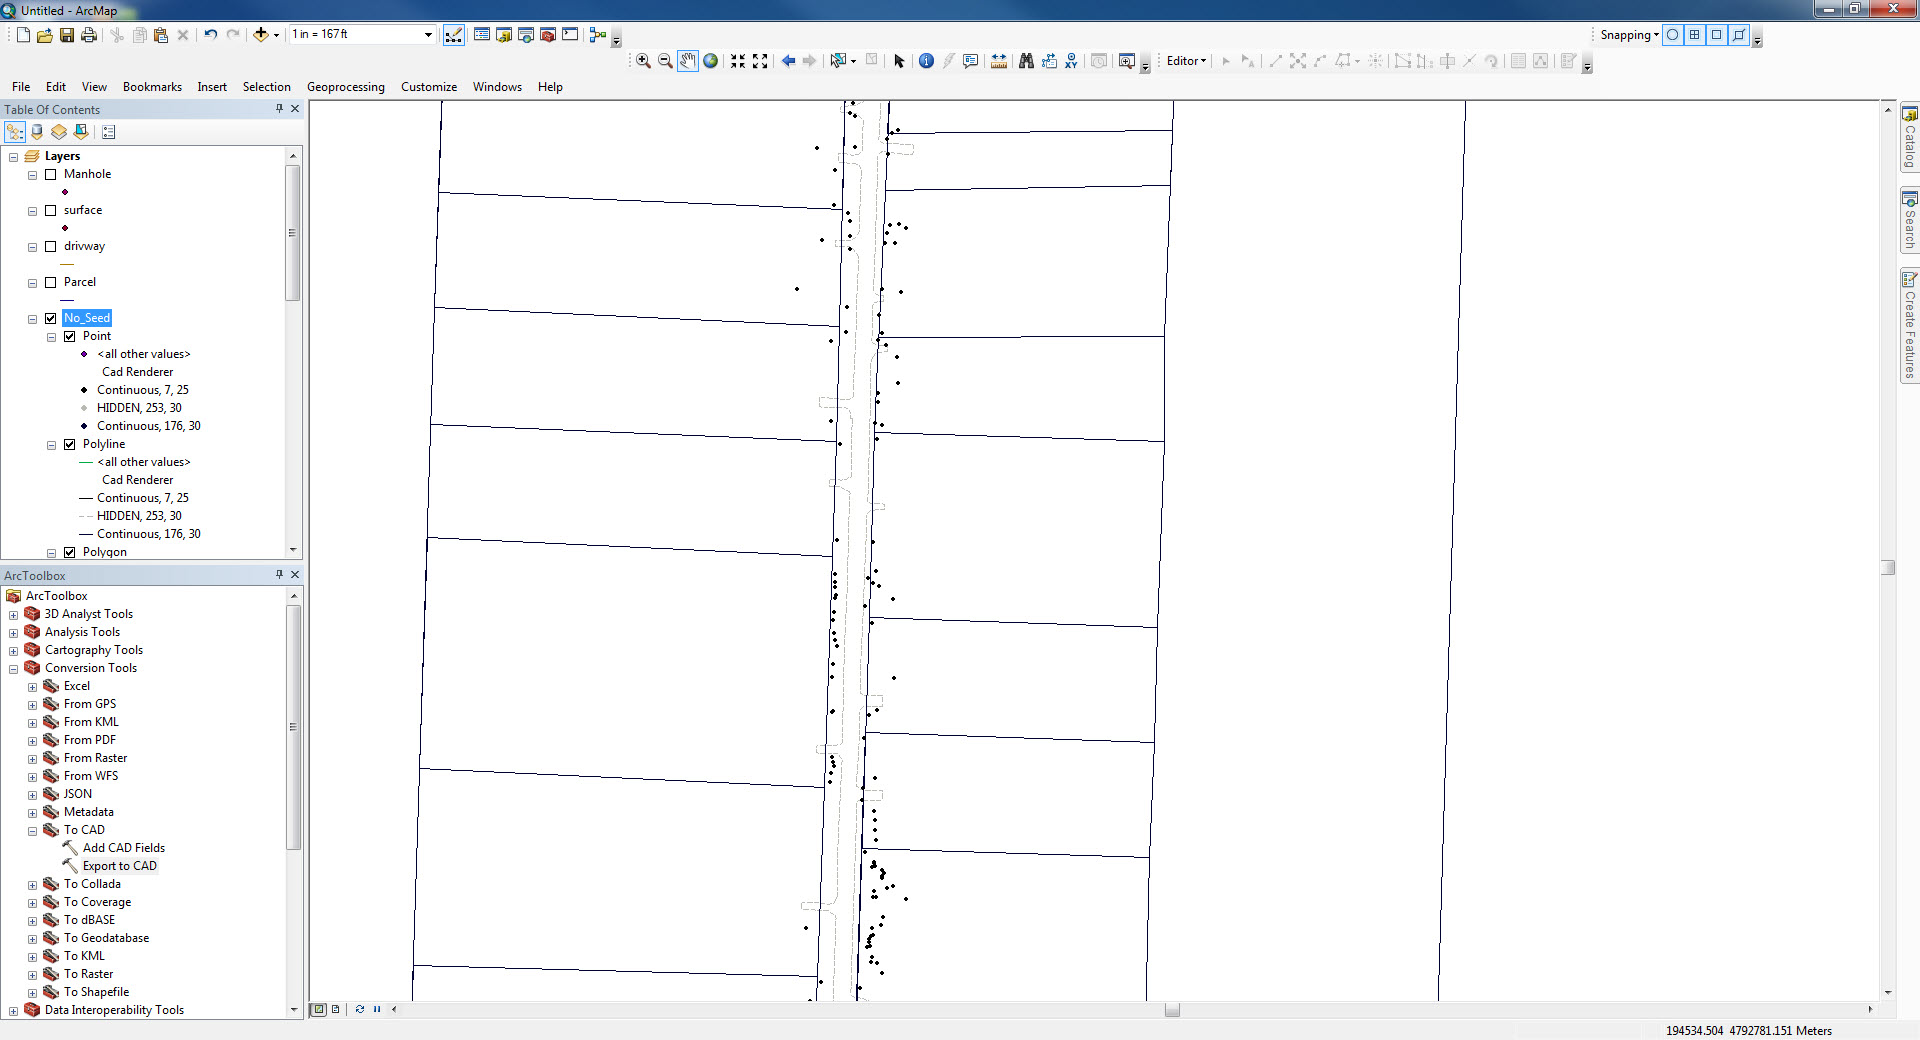 This is image show what the dwg looks like without a seed file